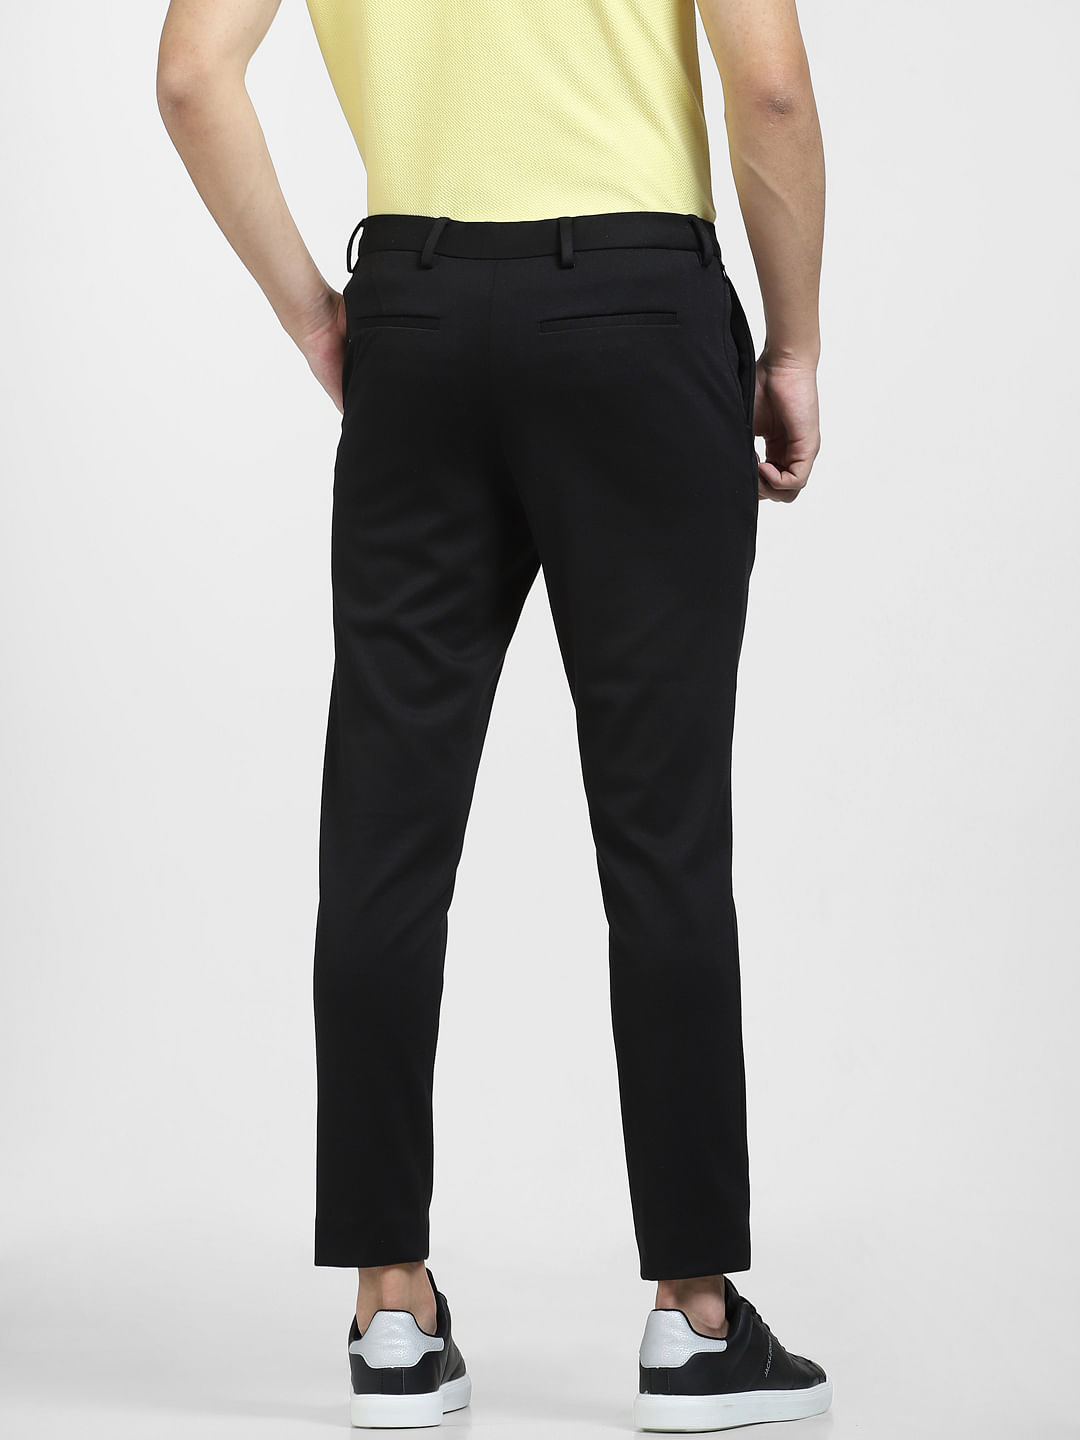 Buy Royal Blue Mid Rise Slim Fit Trousers for Men